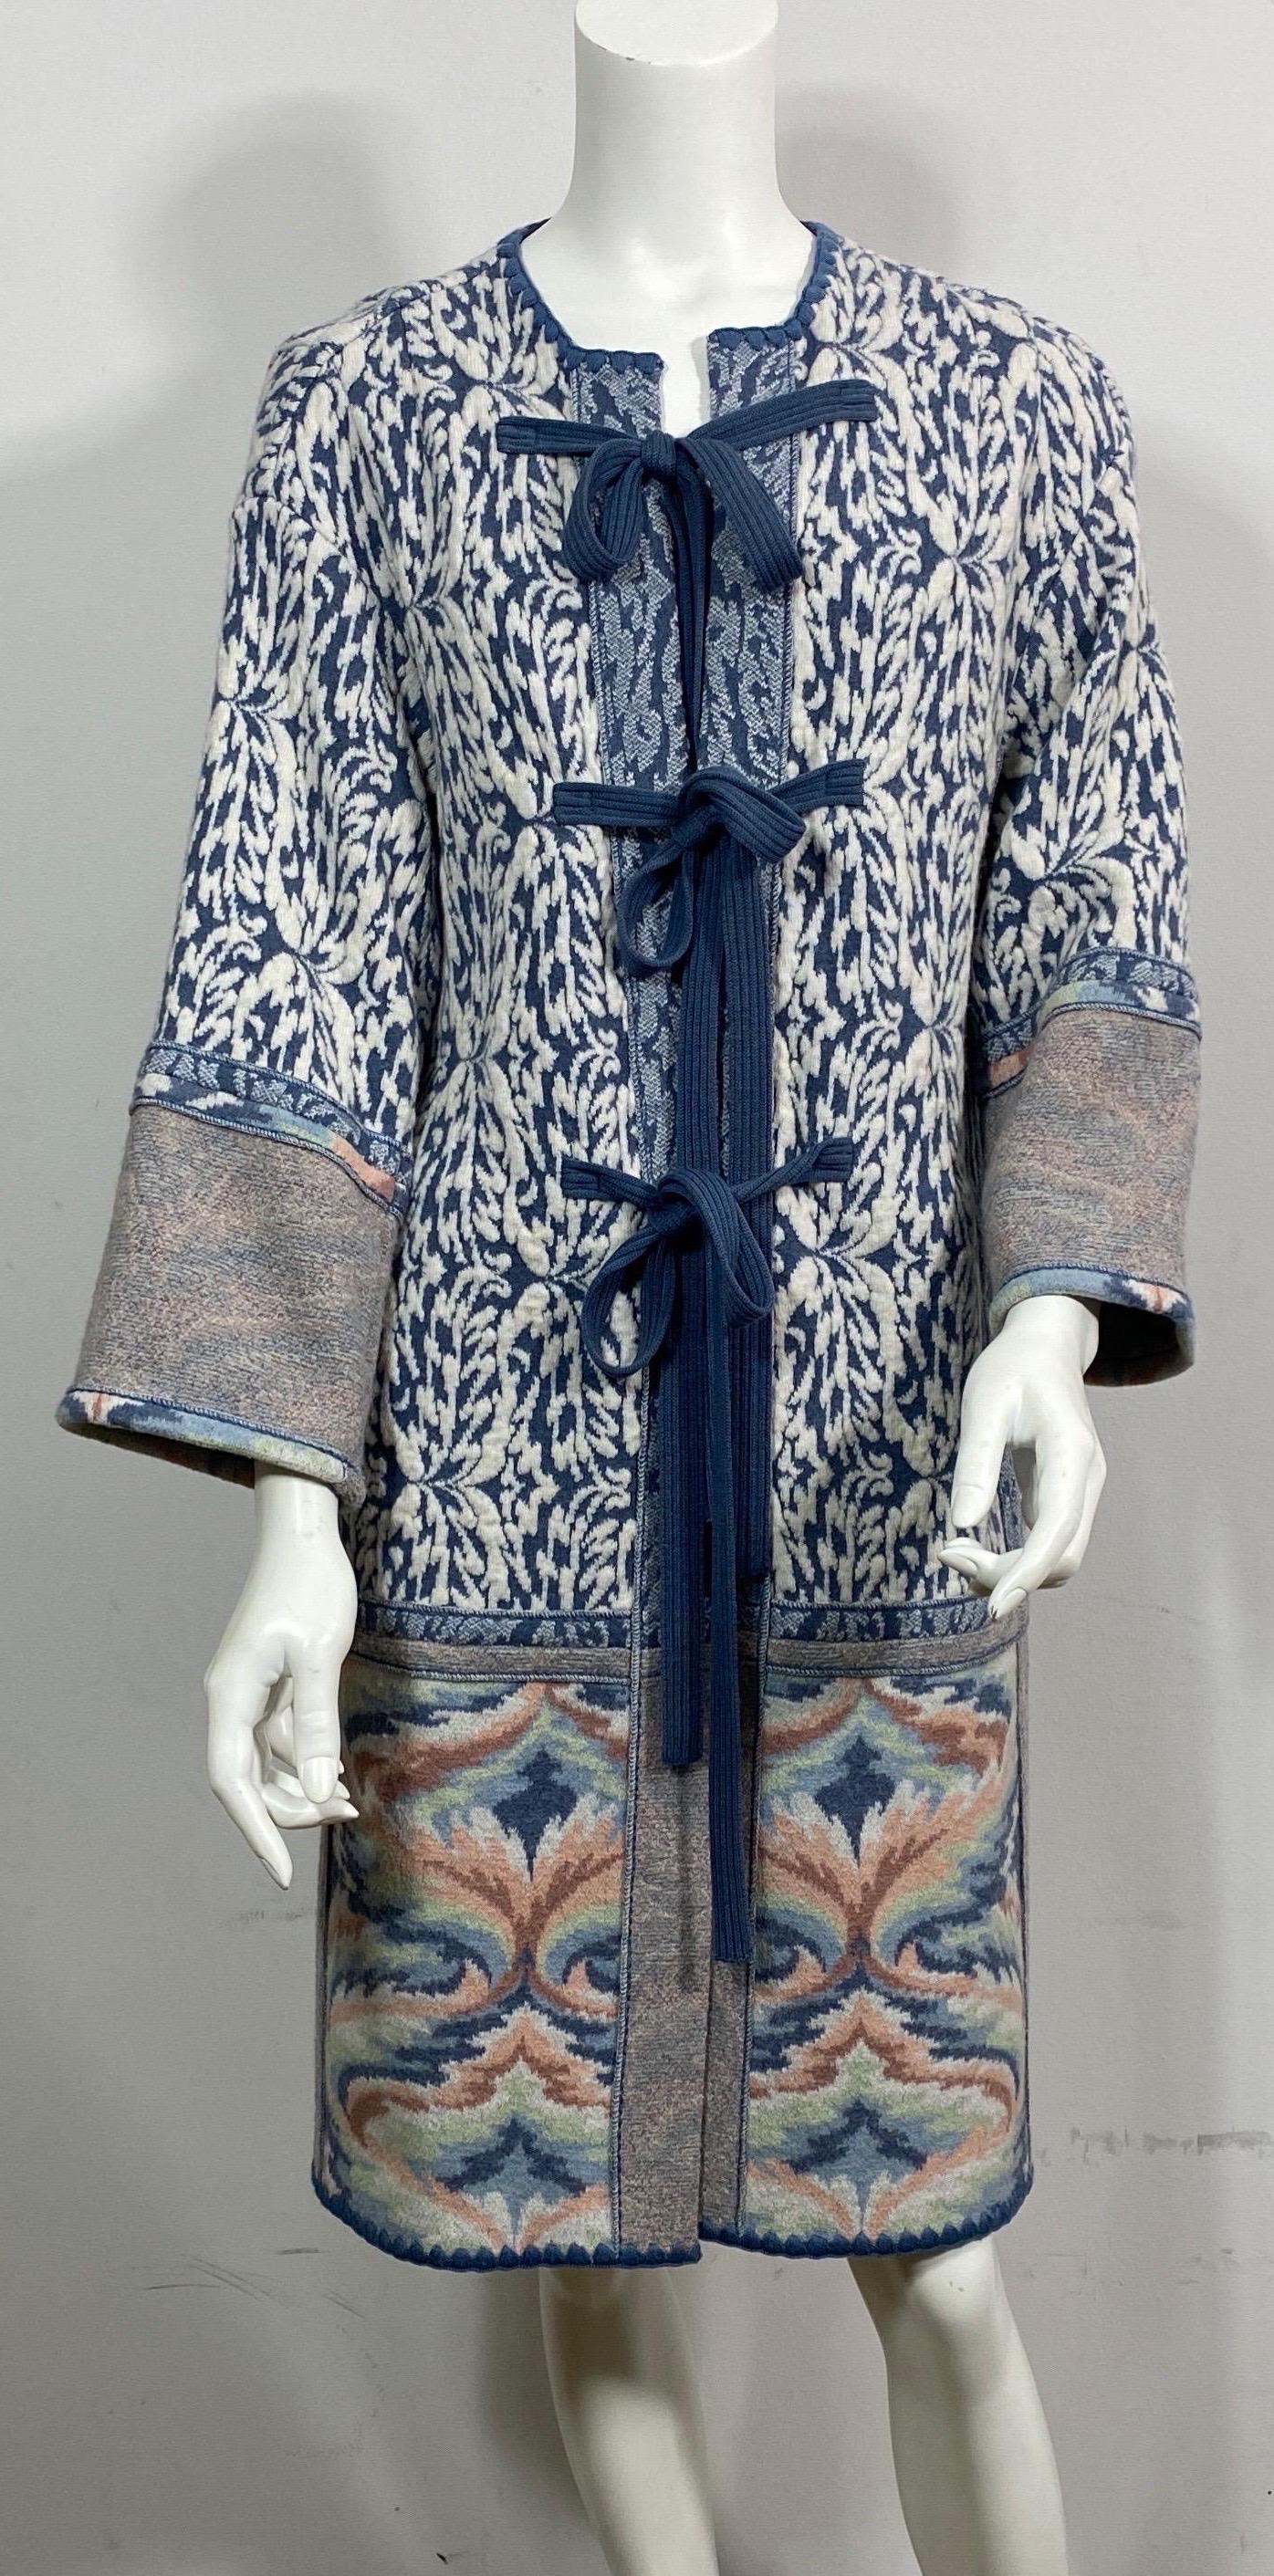 Missoni Blue and Cream Wool Knit Sweater Coat - Size Small although it could fit a medium for sure. This Missoni Coat has a blue and ivory multiple patterned wool knit fabric with a round collar, 3 knit 1” tie closures along the front of the coat,